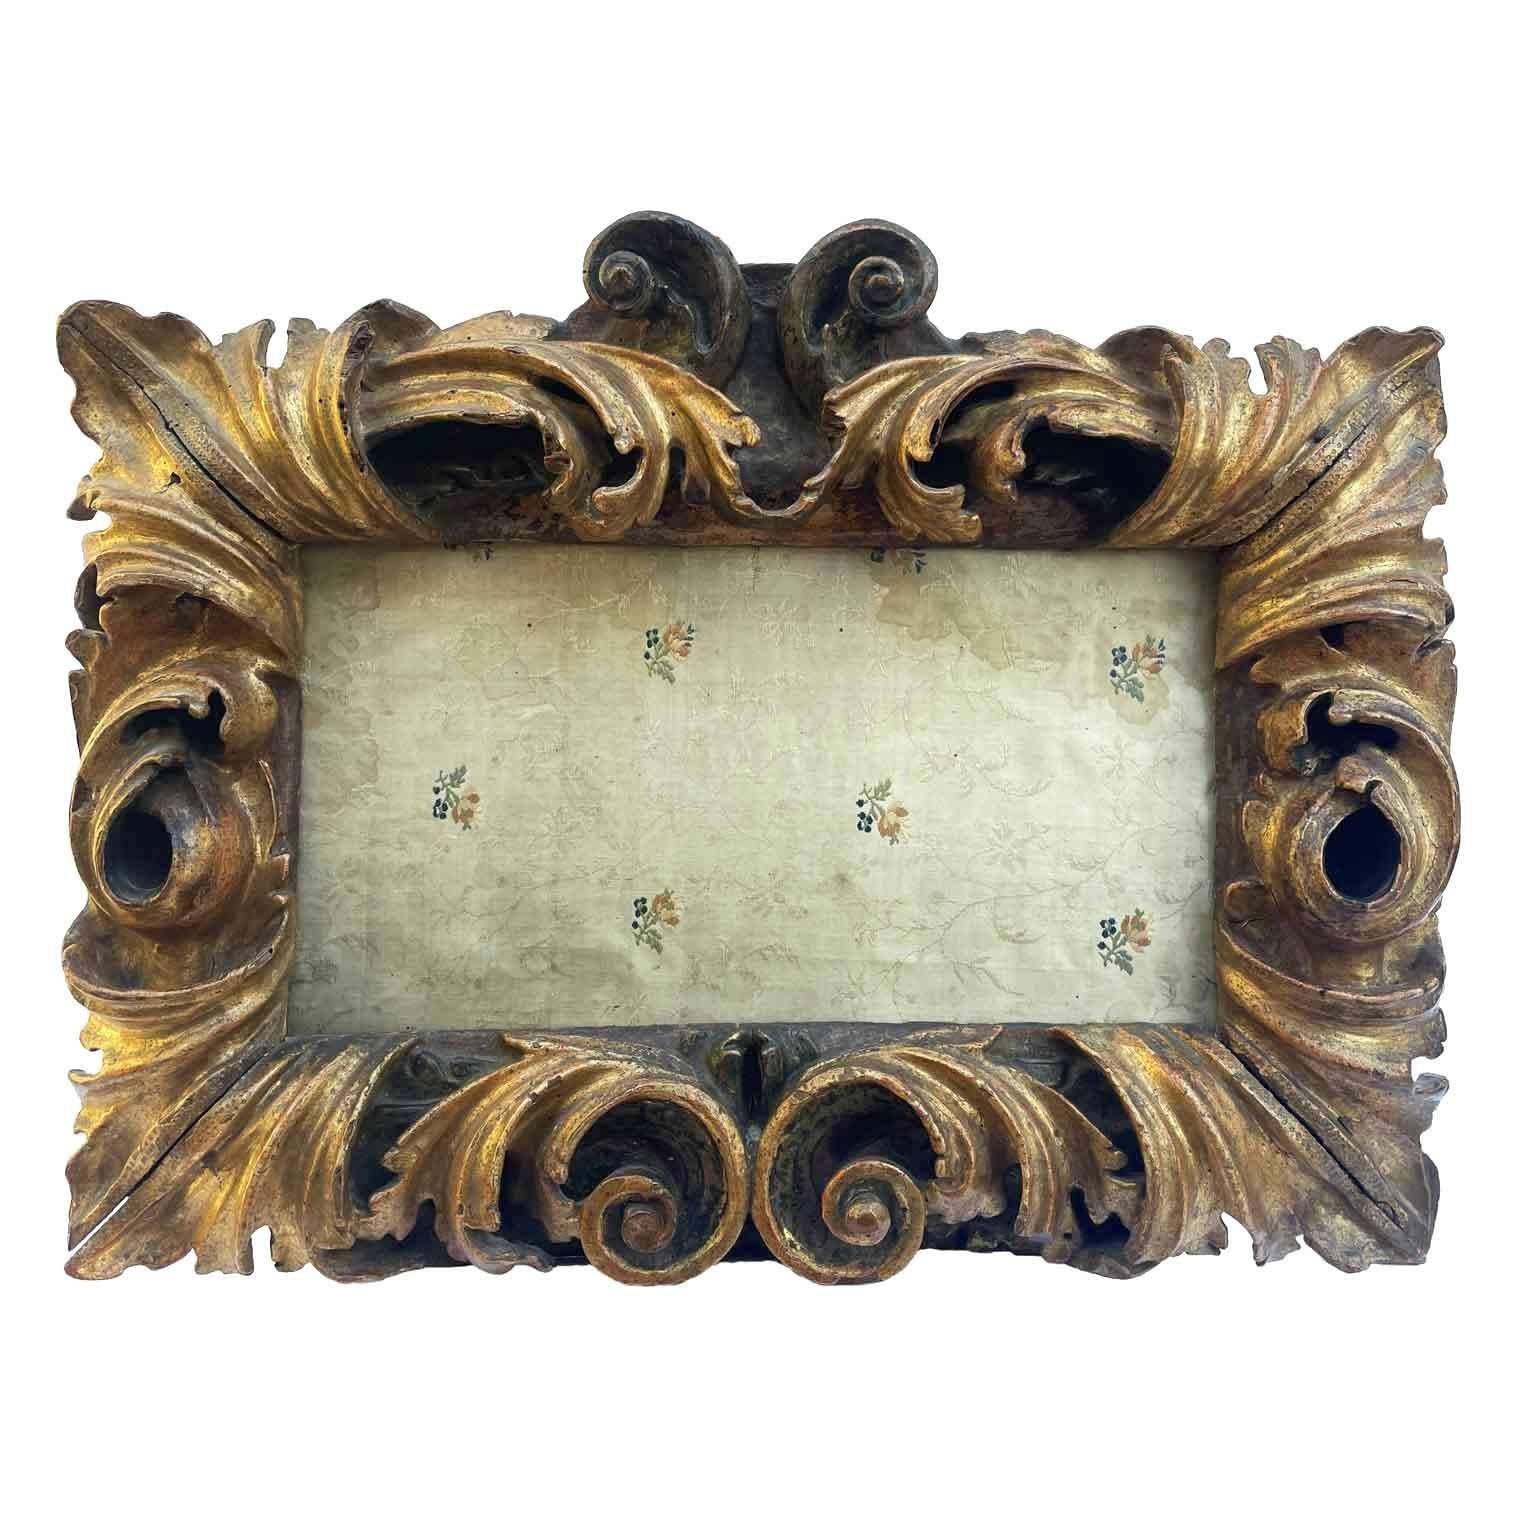 Hand carved Baroque Cartouche frame of rectangular shape formed by deep  volutes that connect with two central keys and foliage with the bulbous ribbing near the corners.  Gilded in fine gold gouache with Armenian red bolus preparation. Inside it is